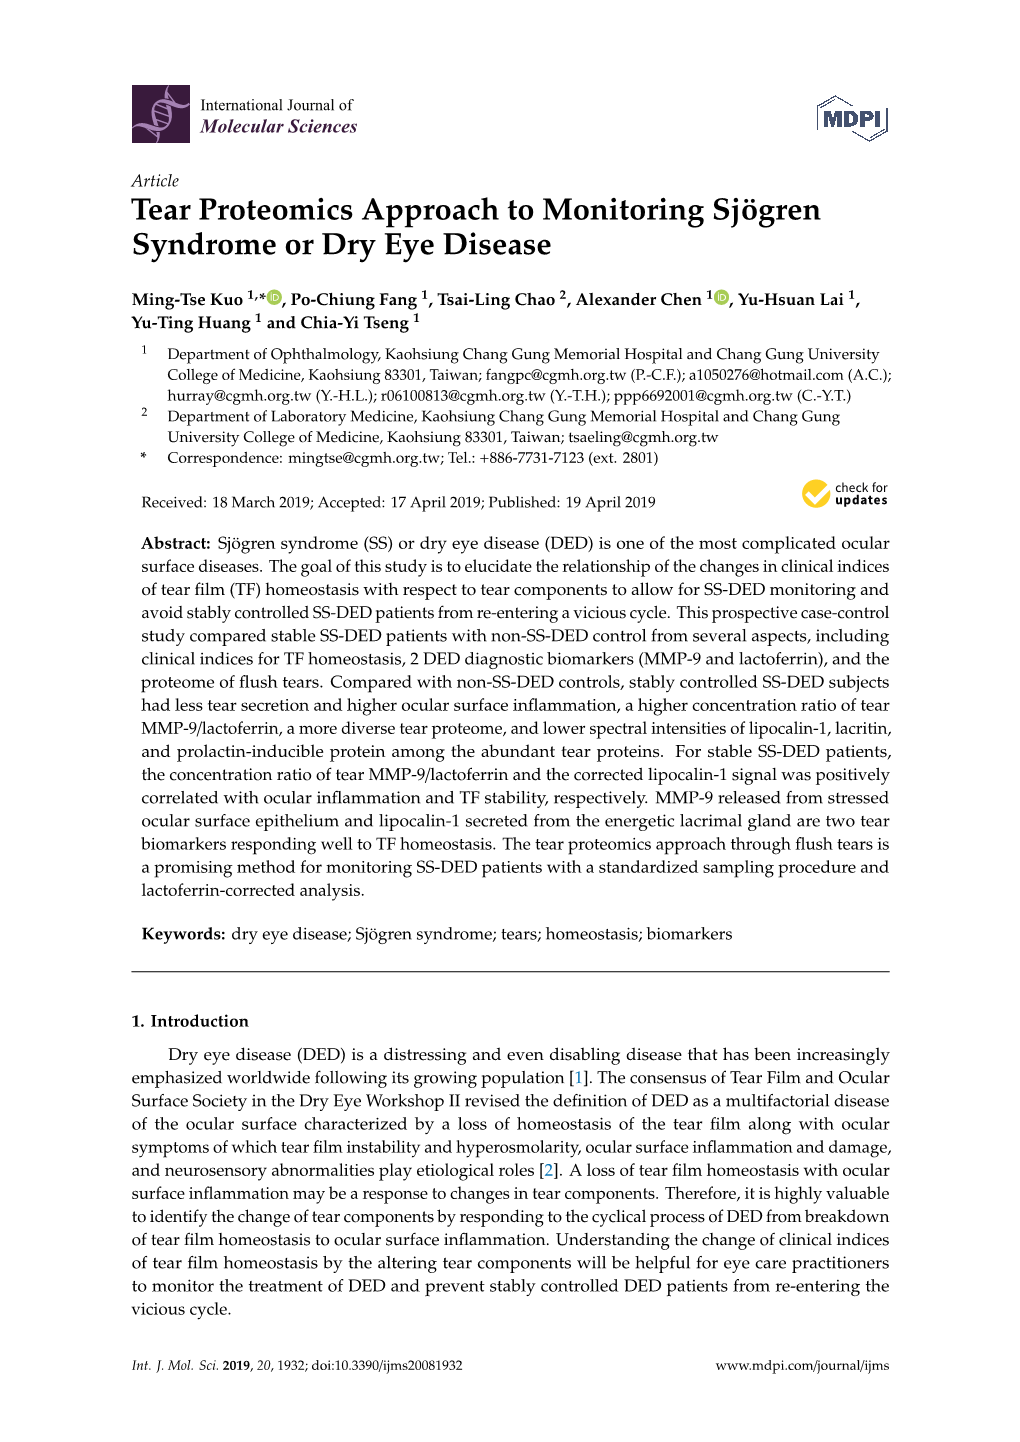 Tear Proteomics Approach to Monitoring Sjögren Syndrome Or Dry Eye Disease